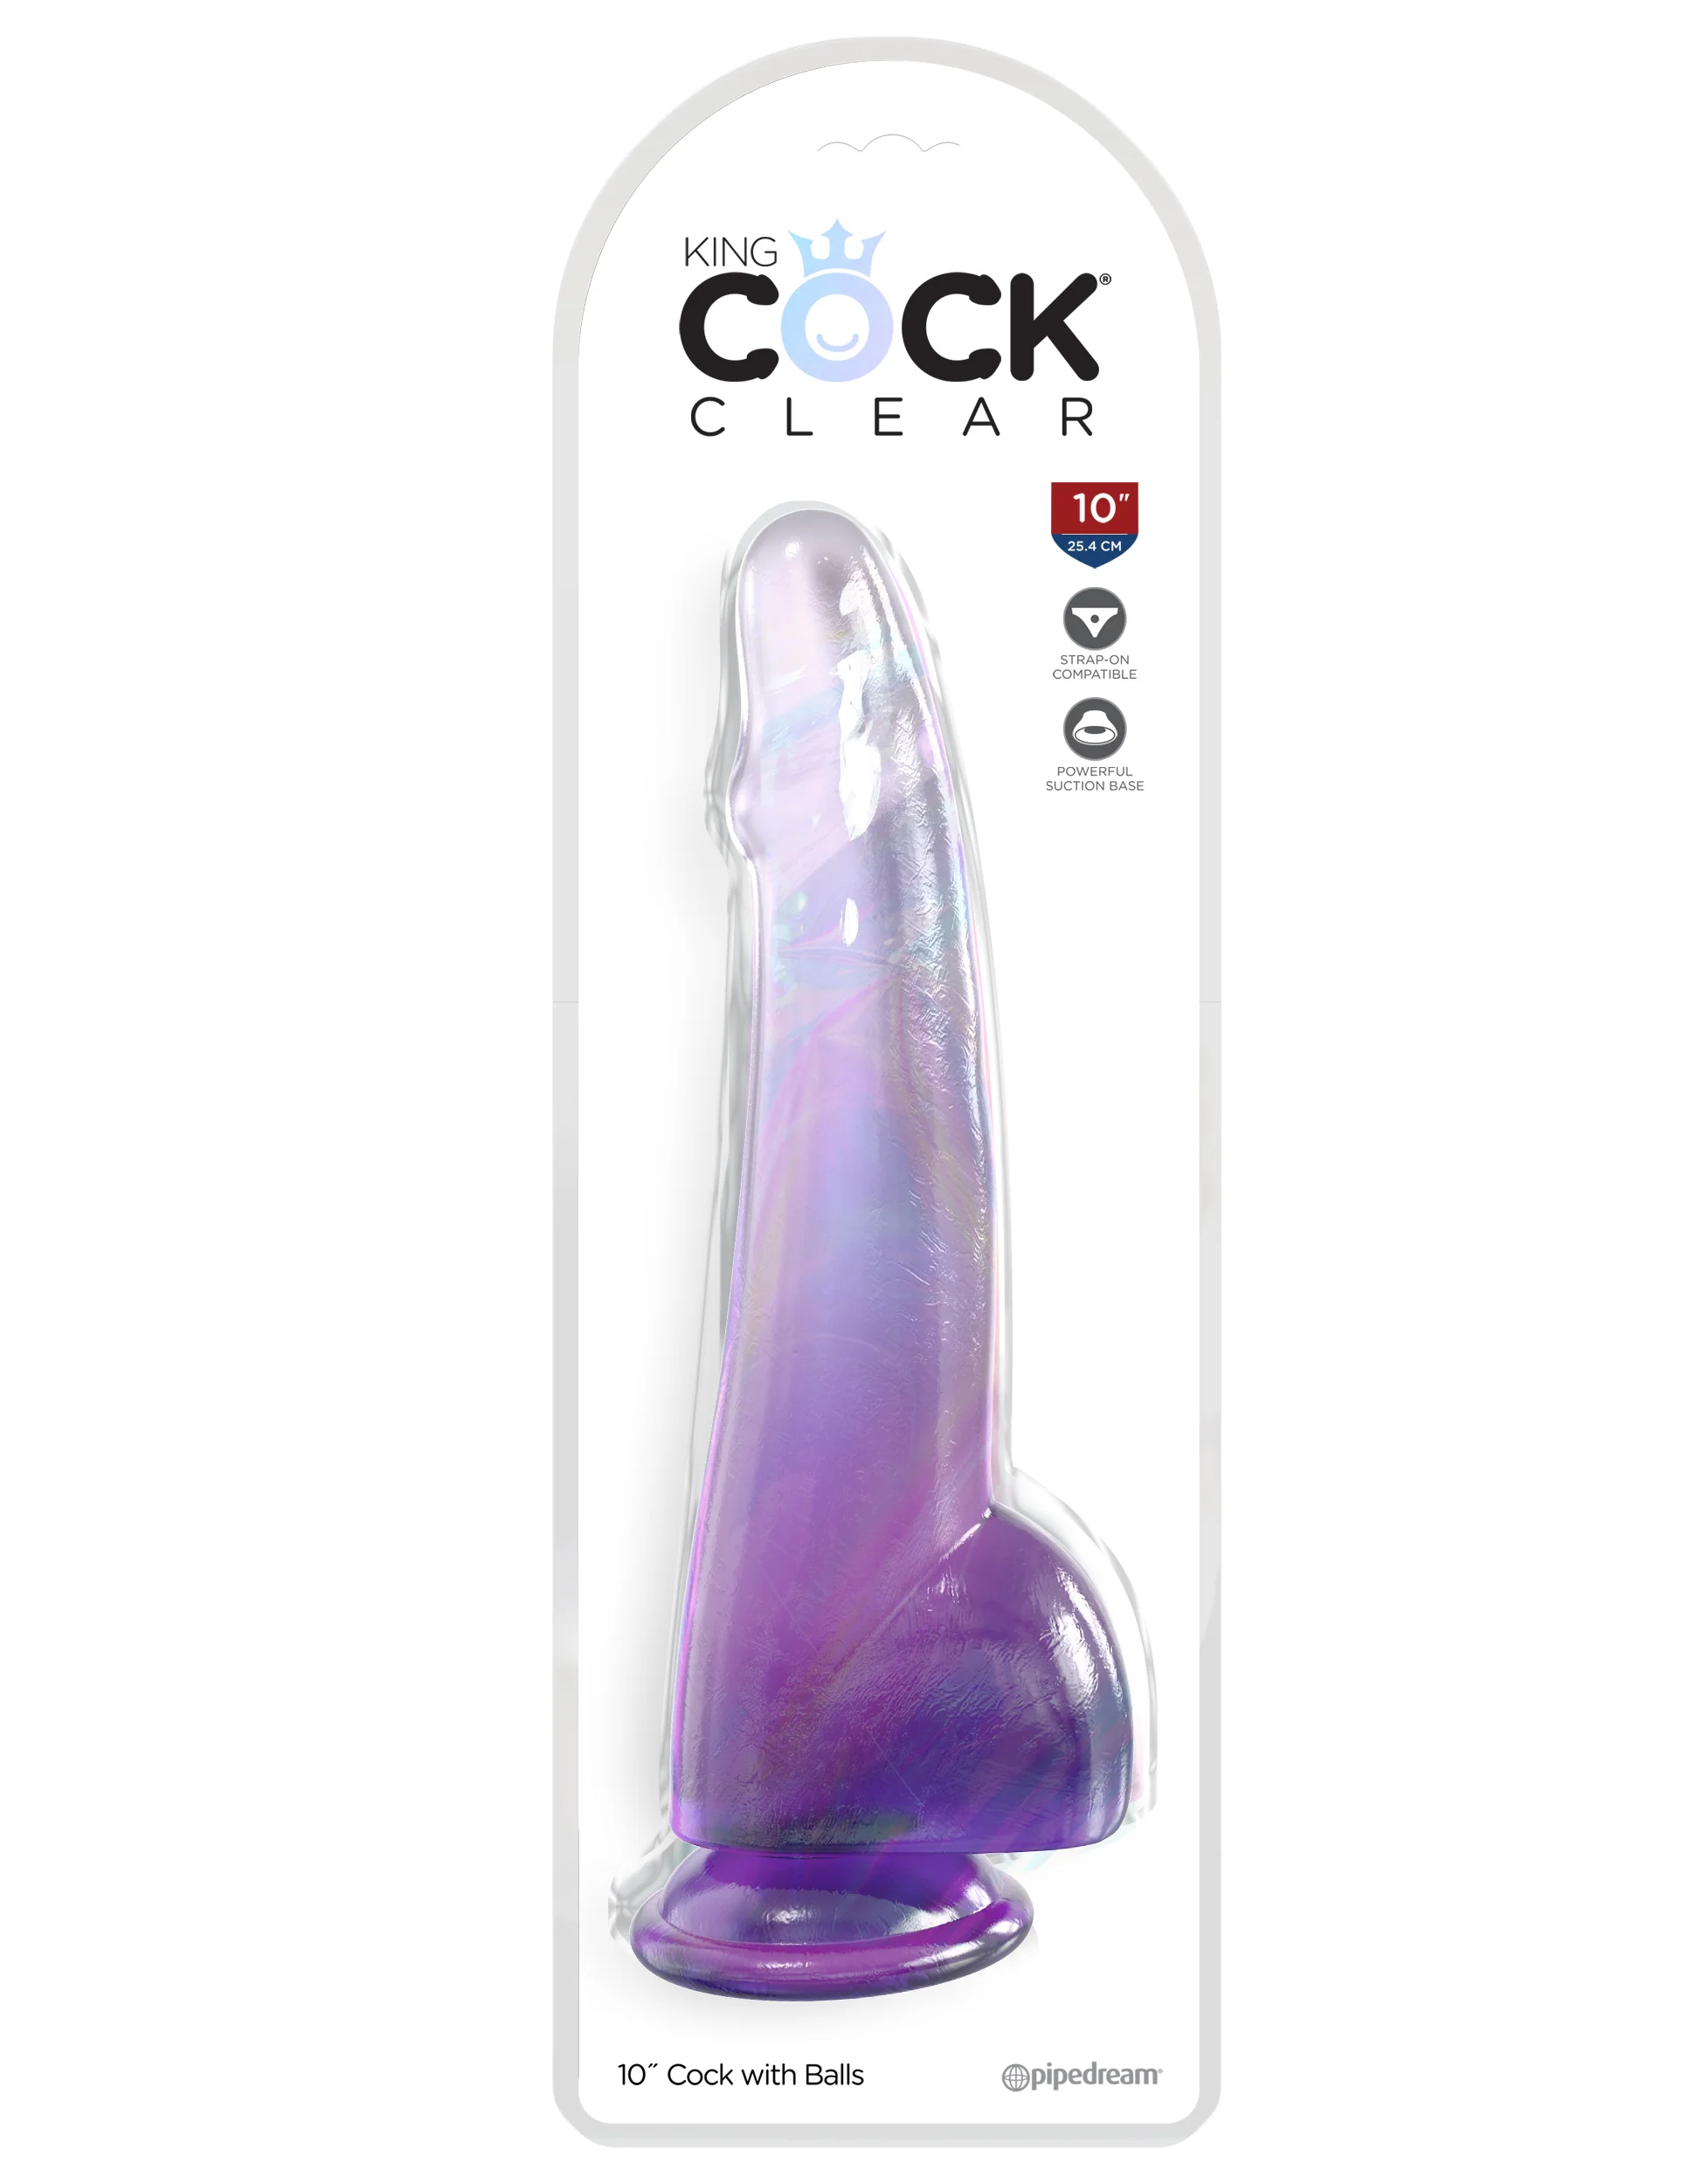       King Cock Clear 10, 